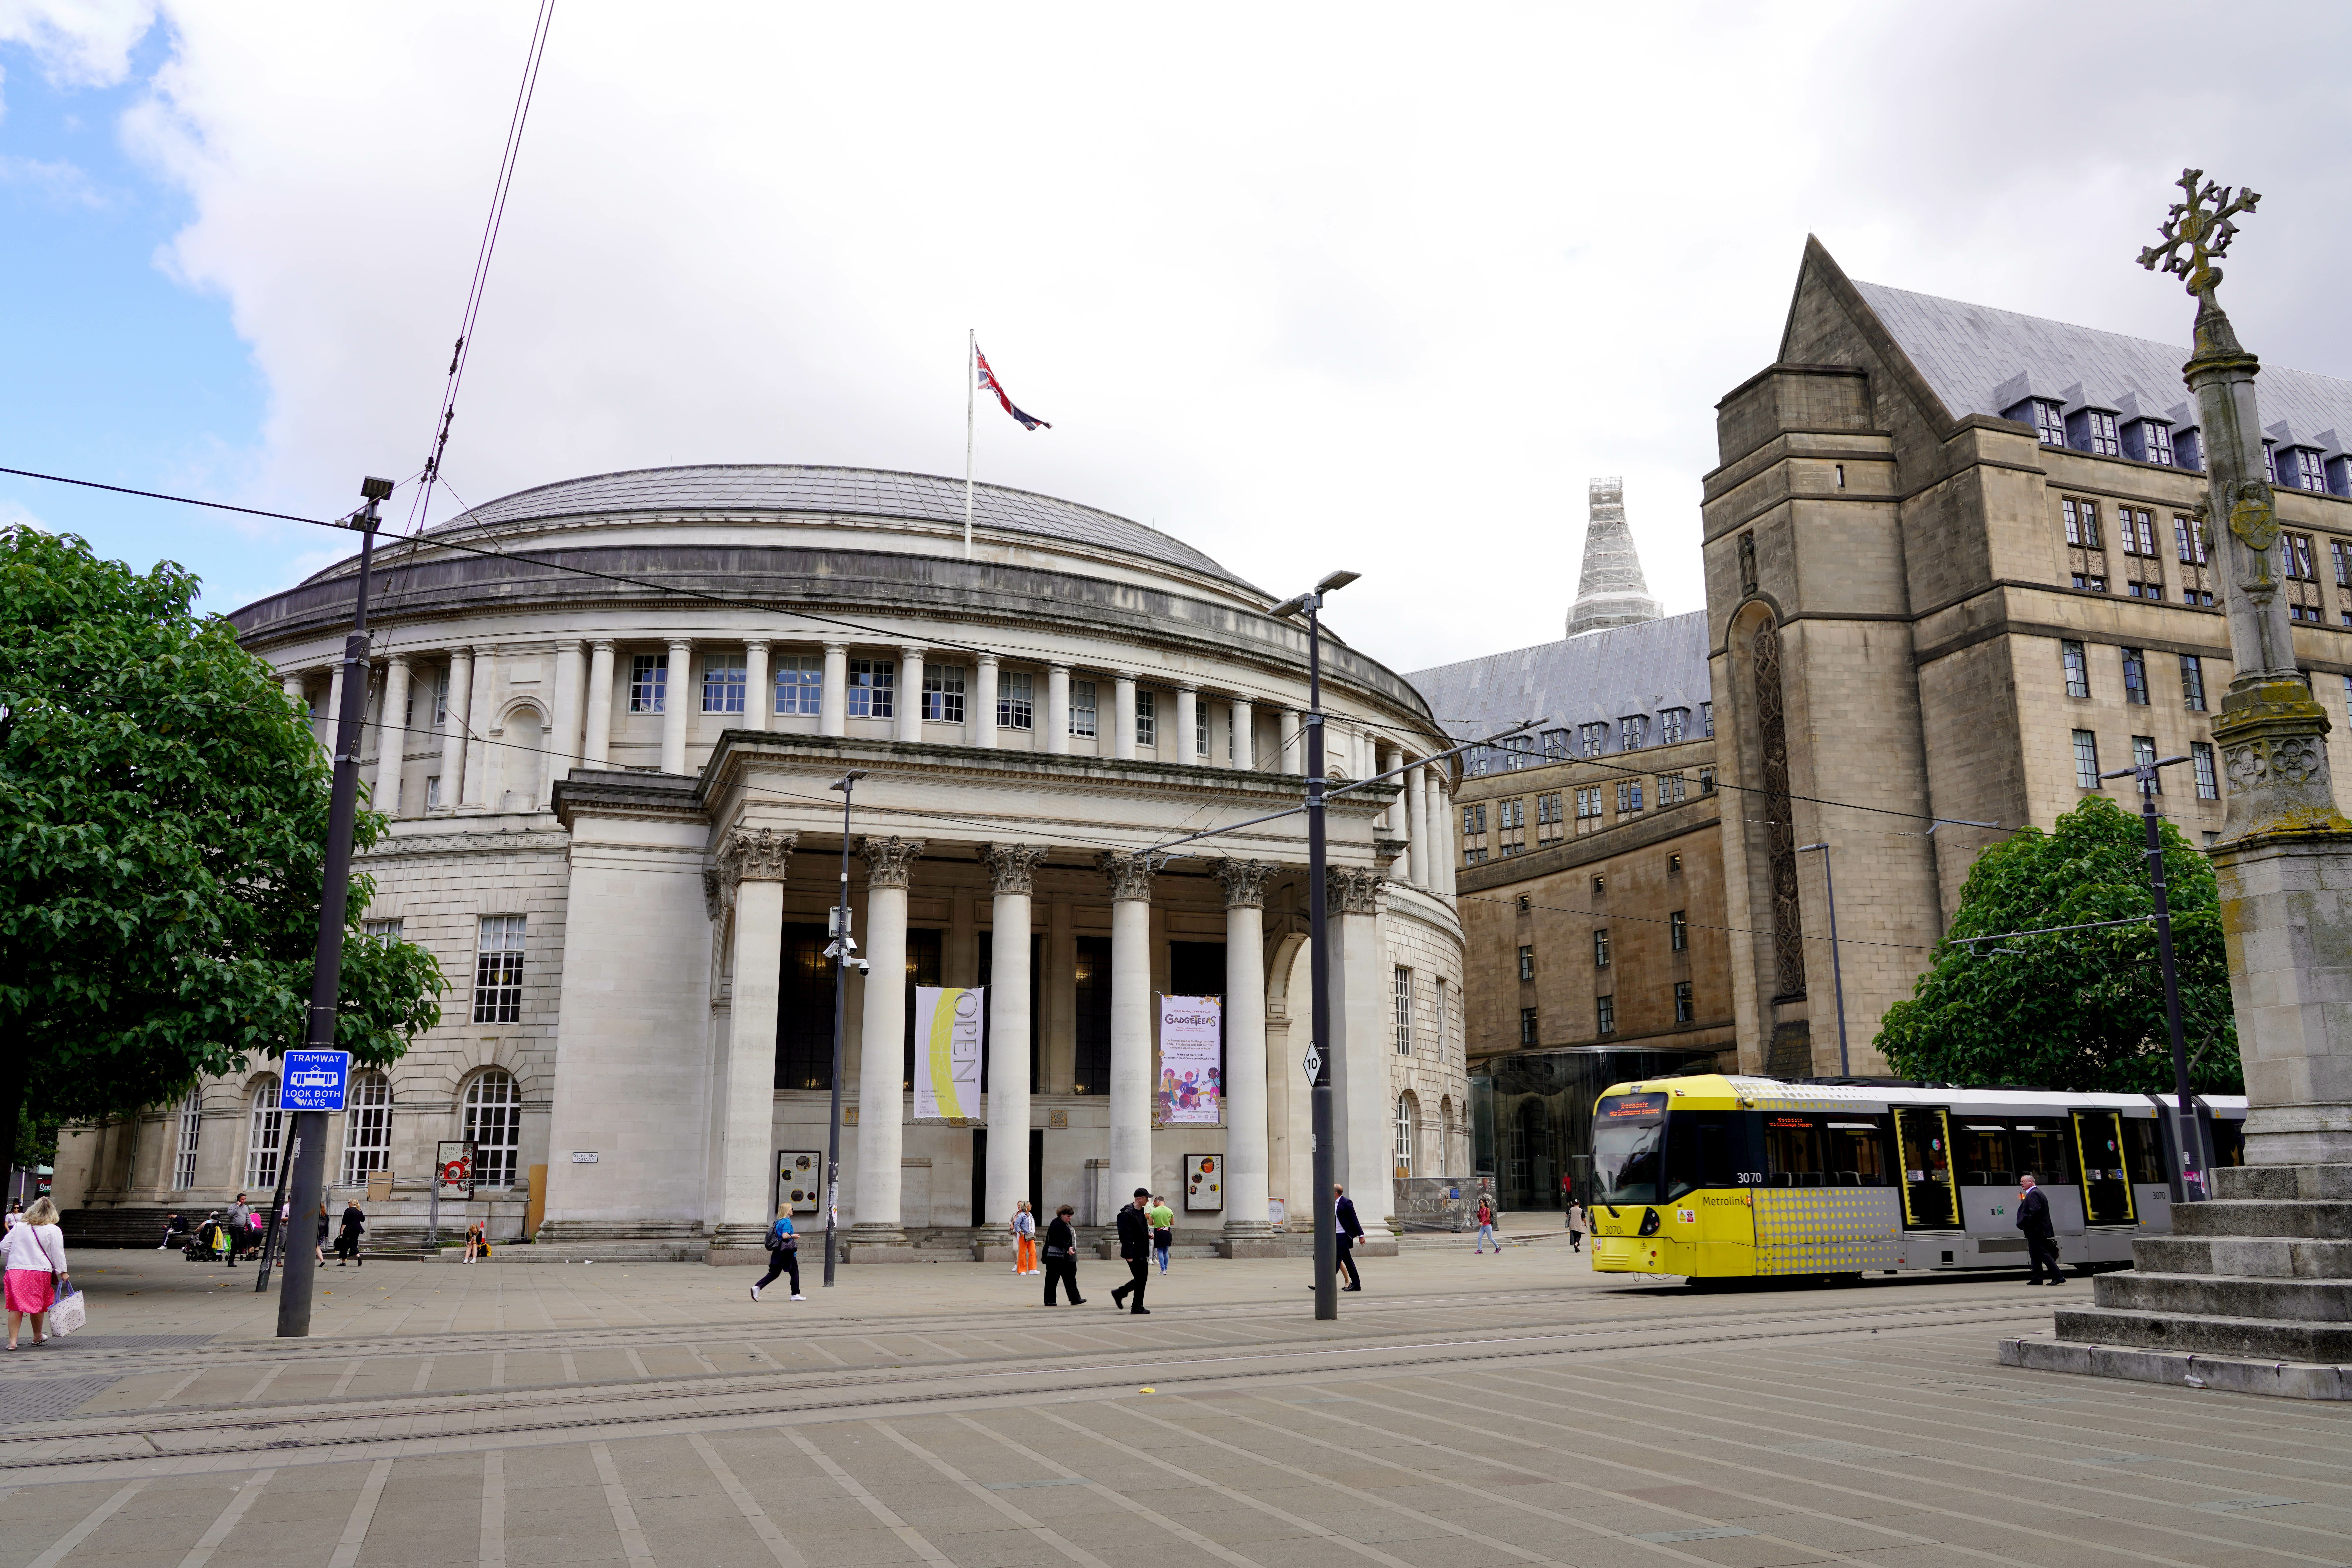 Manchester Central Library with tram running past